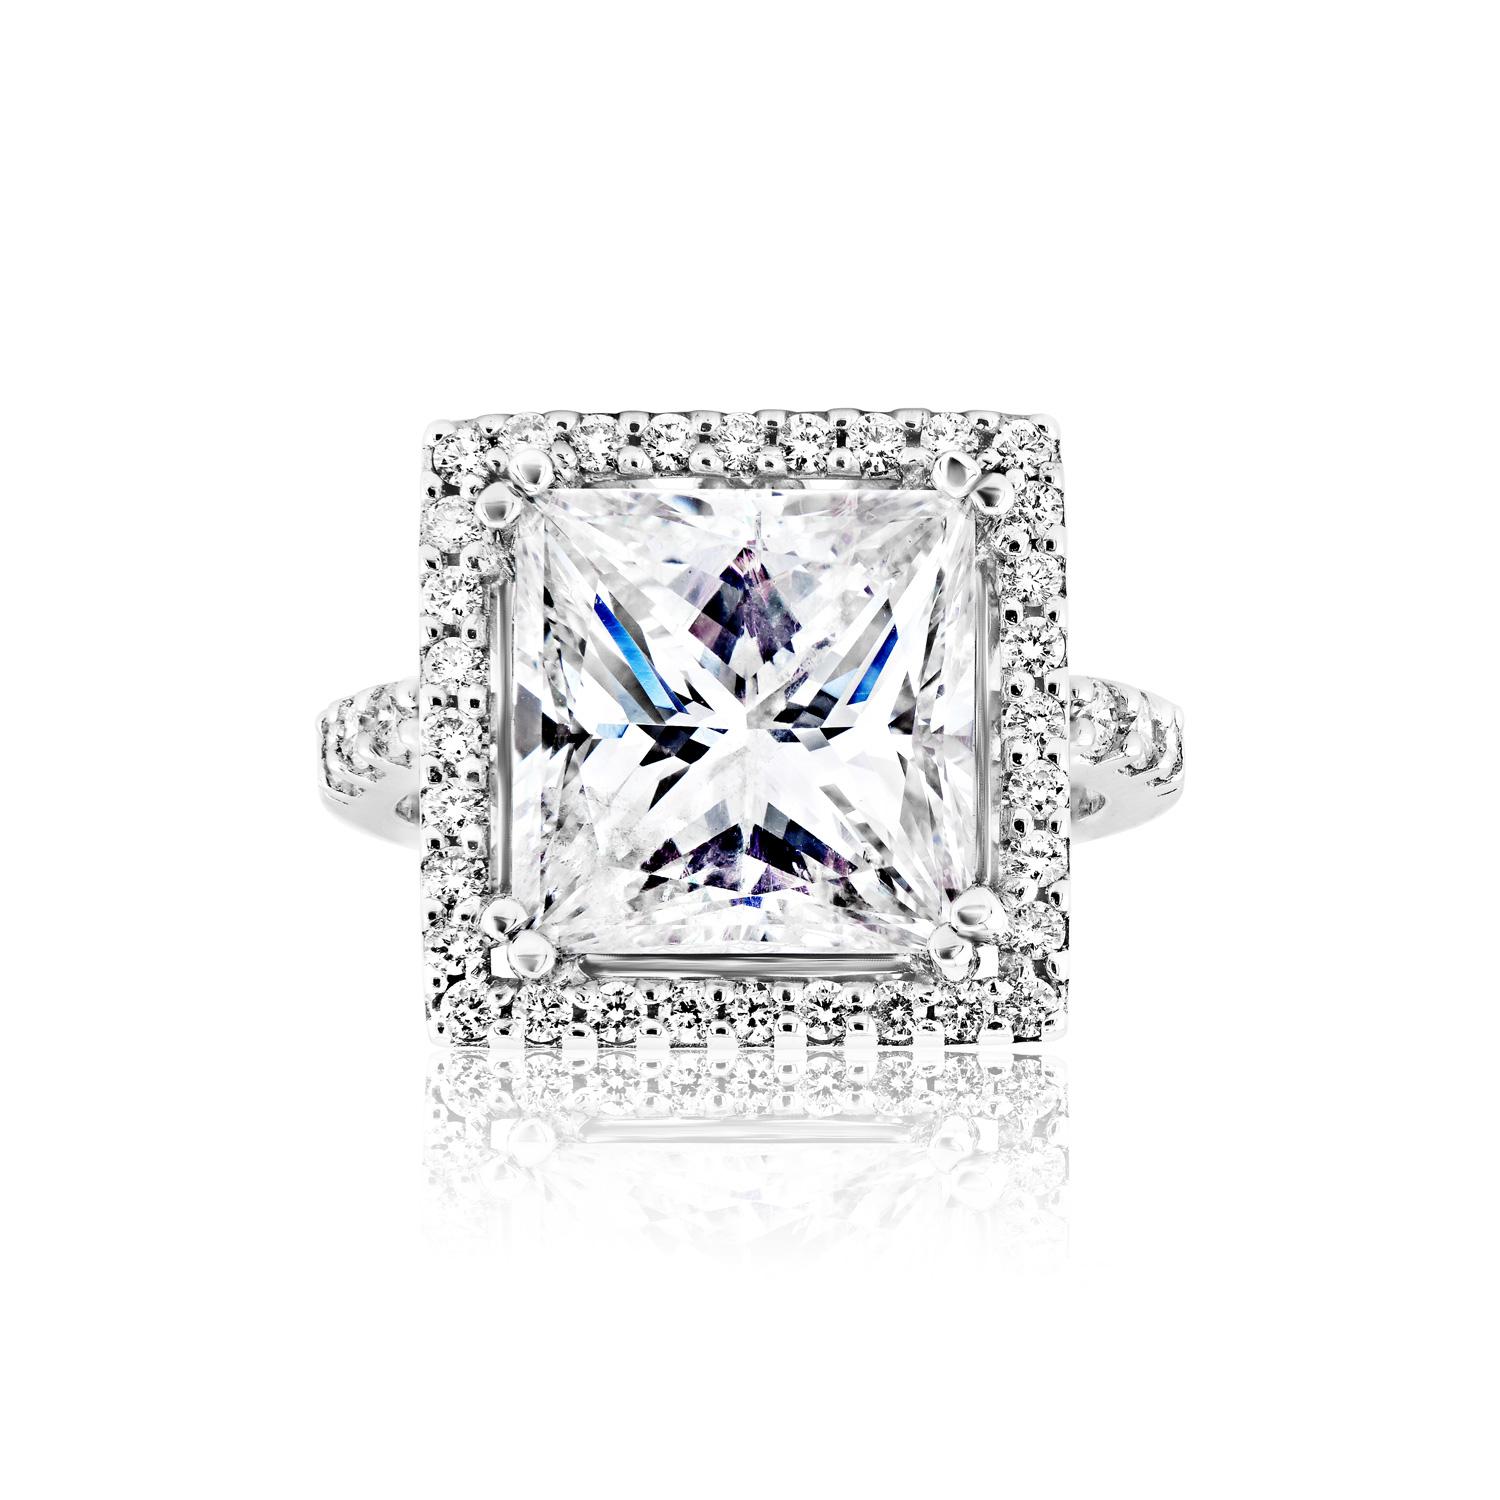 Center Diamond:

Carat Weight: 6.32 Carats
Style: Princess Cut - Feather Filled- Spl Care Req'd

Ring:
Settings: Halo, Sidestone  & 4 round prong
Metal: 18 Karat White Gold 9.40 Grams
Style: Round Brilliant Cut
Diamonds: 1.05 Carats
Size: Can be